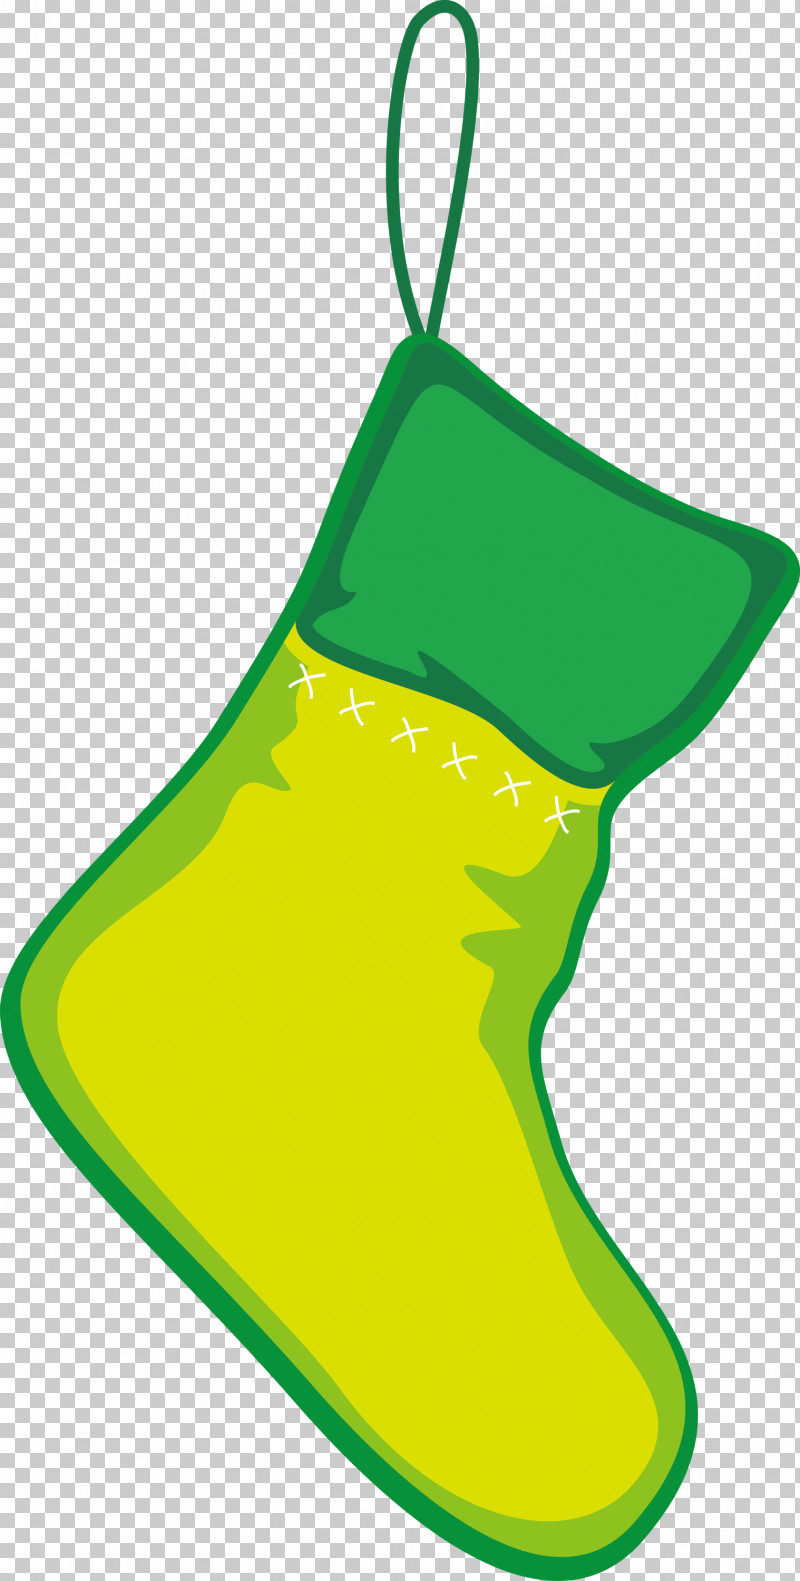 Christmas Stocking PNG, Clipart, Christmas Decoration, Christmas Stocking, Green, Interior Design, Yellow Free PNG Download